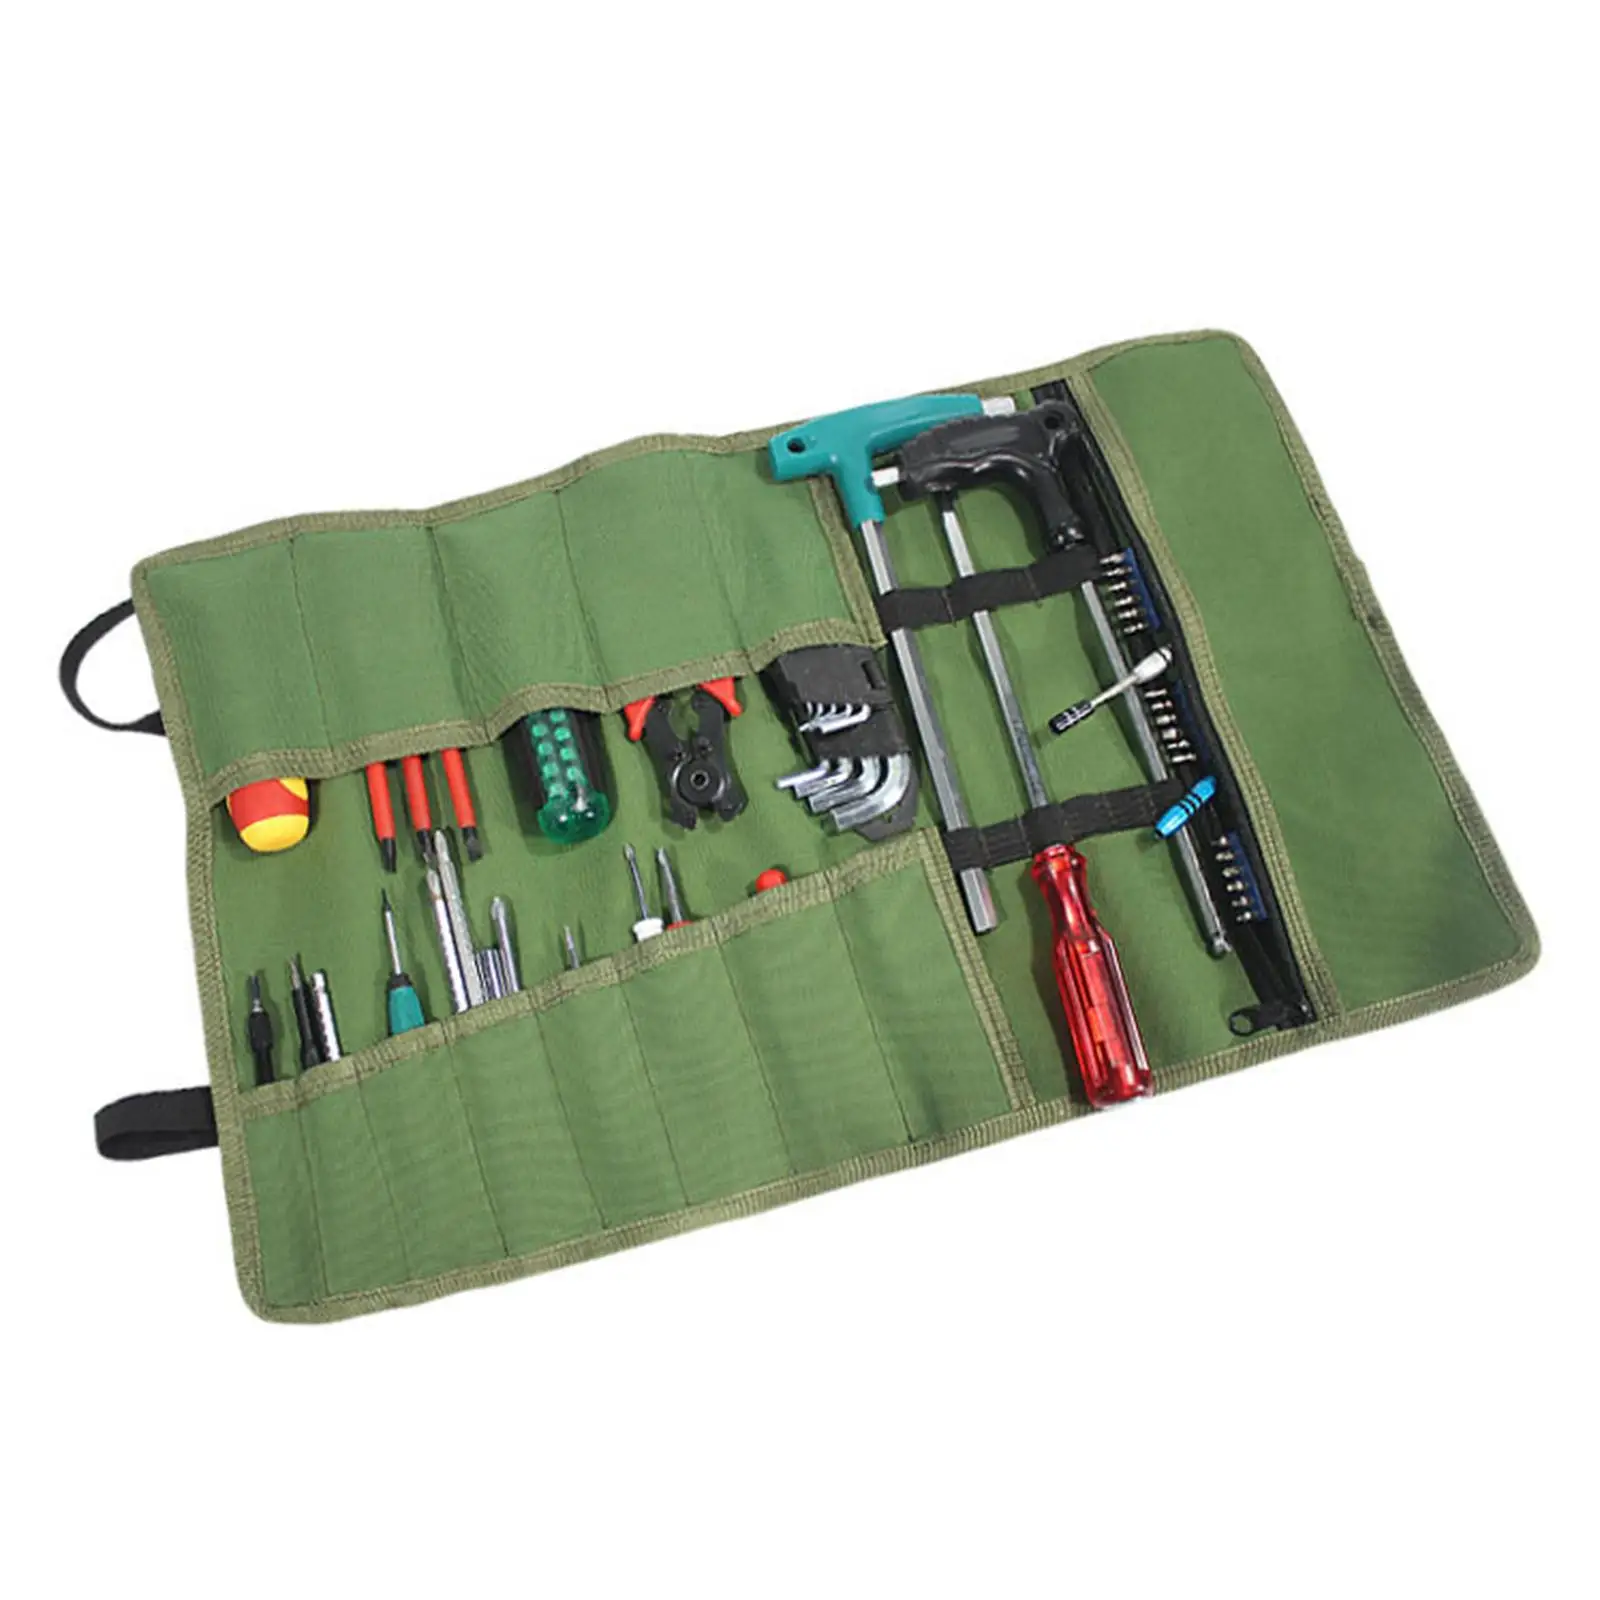 Canvas Tool Bag Devices Universal Storage Roll up Tool Bag Organizer Instrument Pouch for Household Wrenches Screwdrivers Pliers